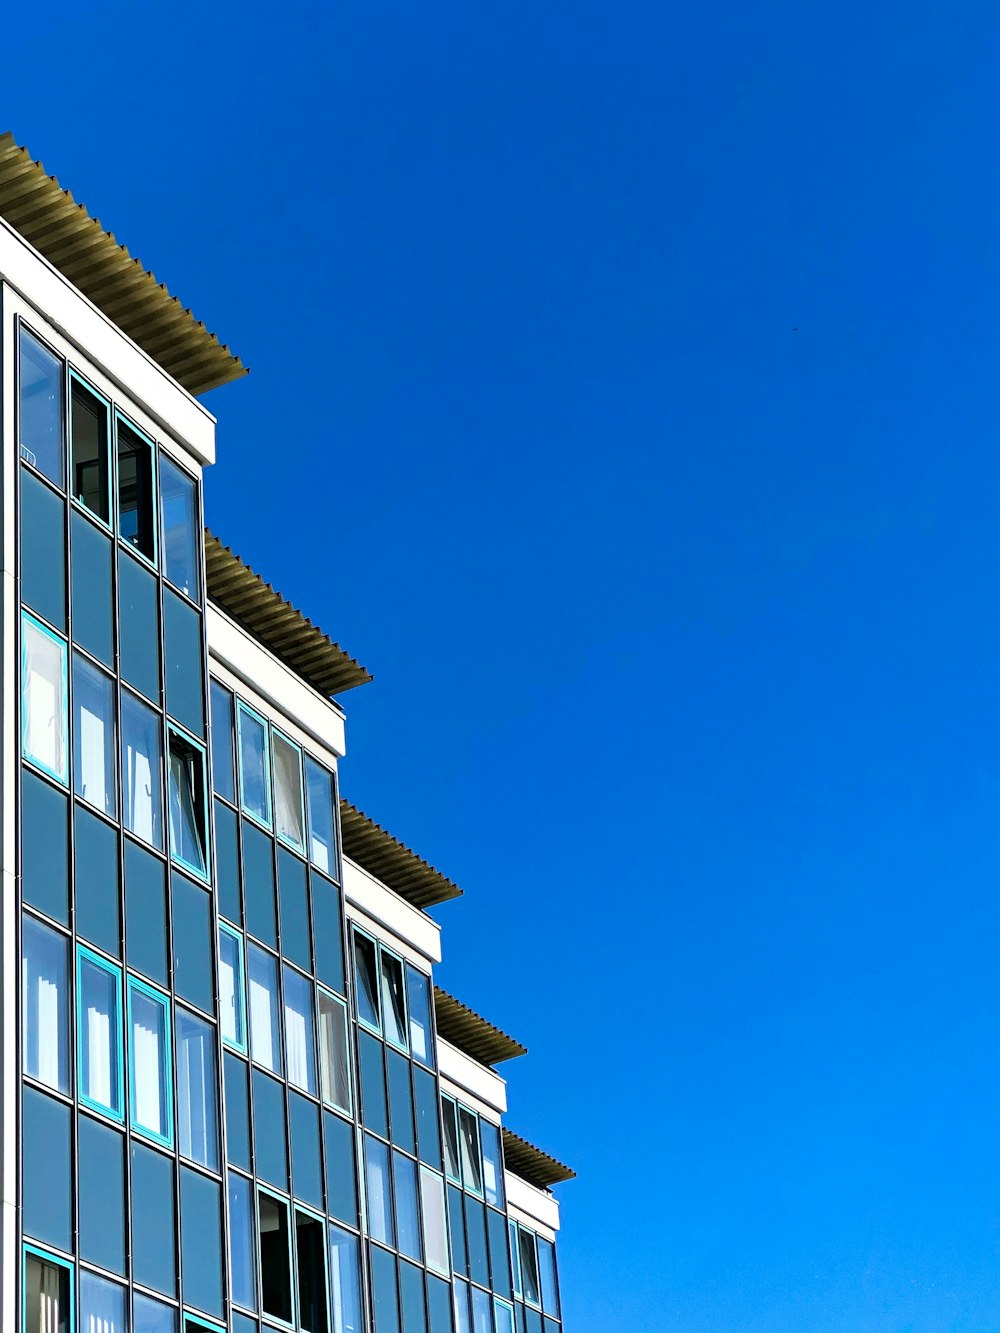 white and blue concrete building under blue sky during daytime